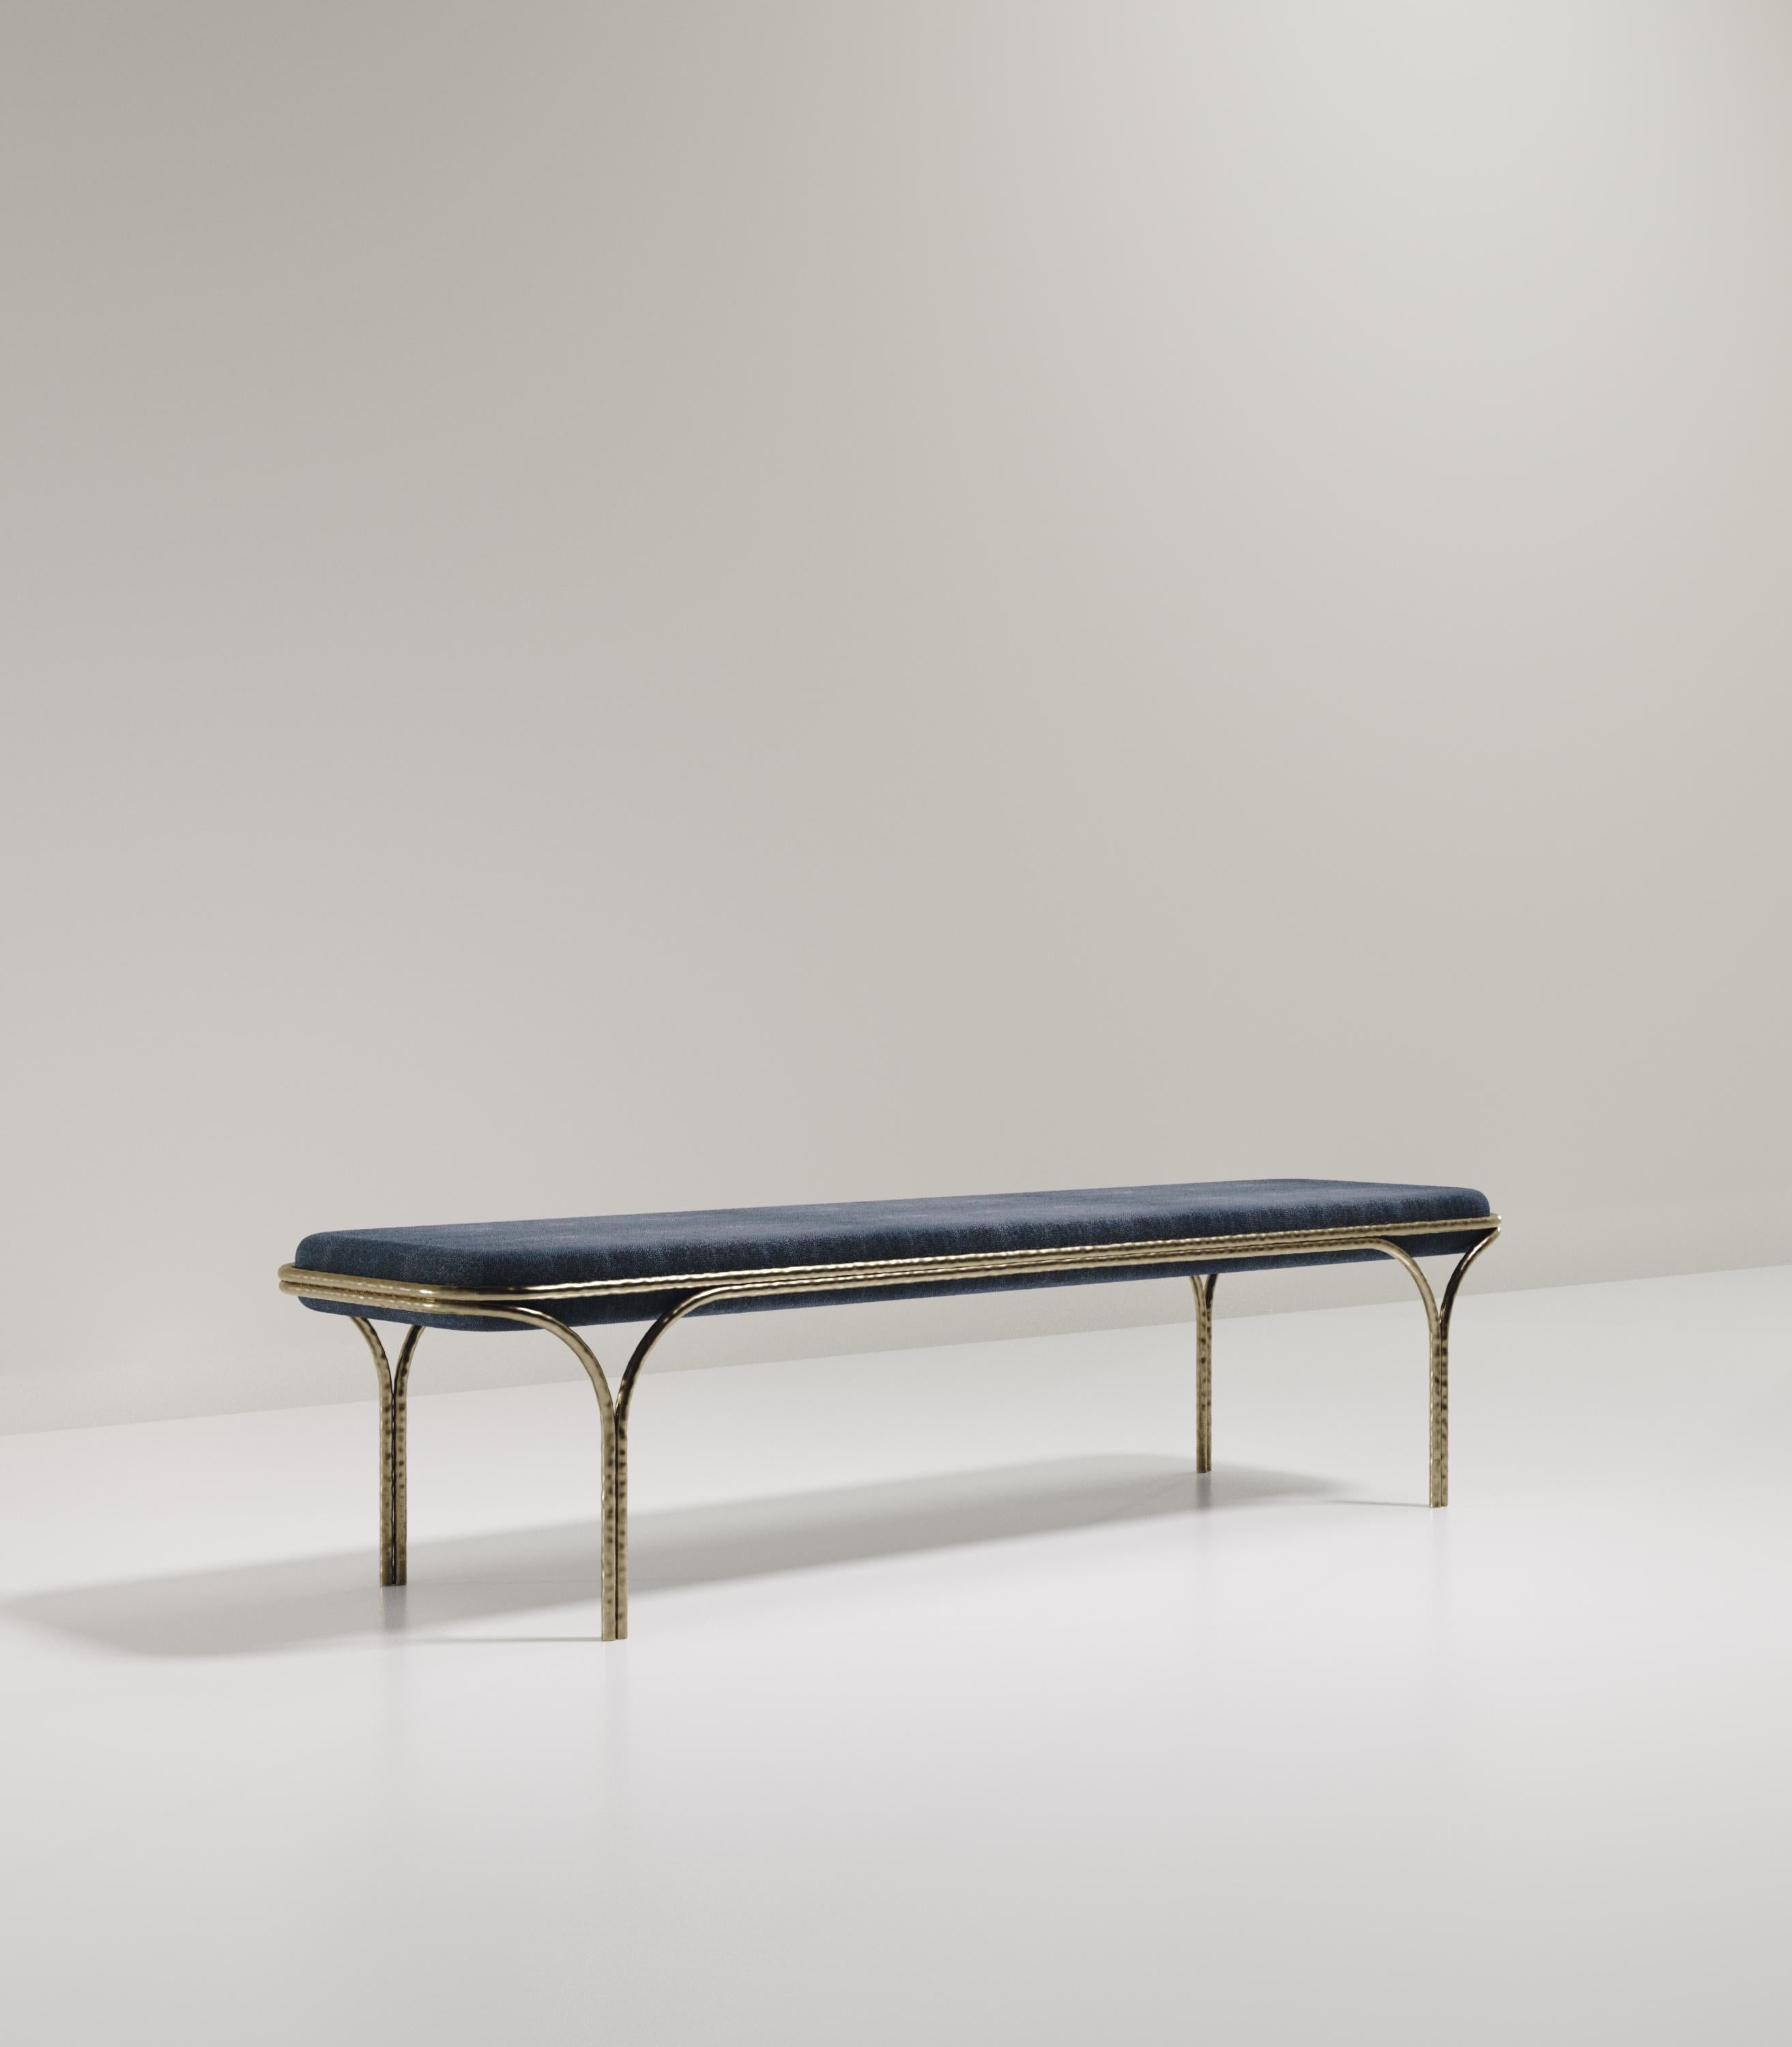 The Arianne Bench by R&Y Augousti is an elegant piece for any space. The denim blue shagreen seat, with curved edges, sits on an organic bronze-patina frame. The intricate frame and legs have a 